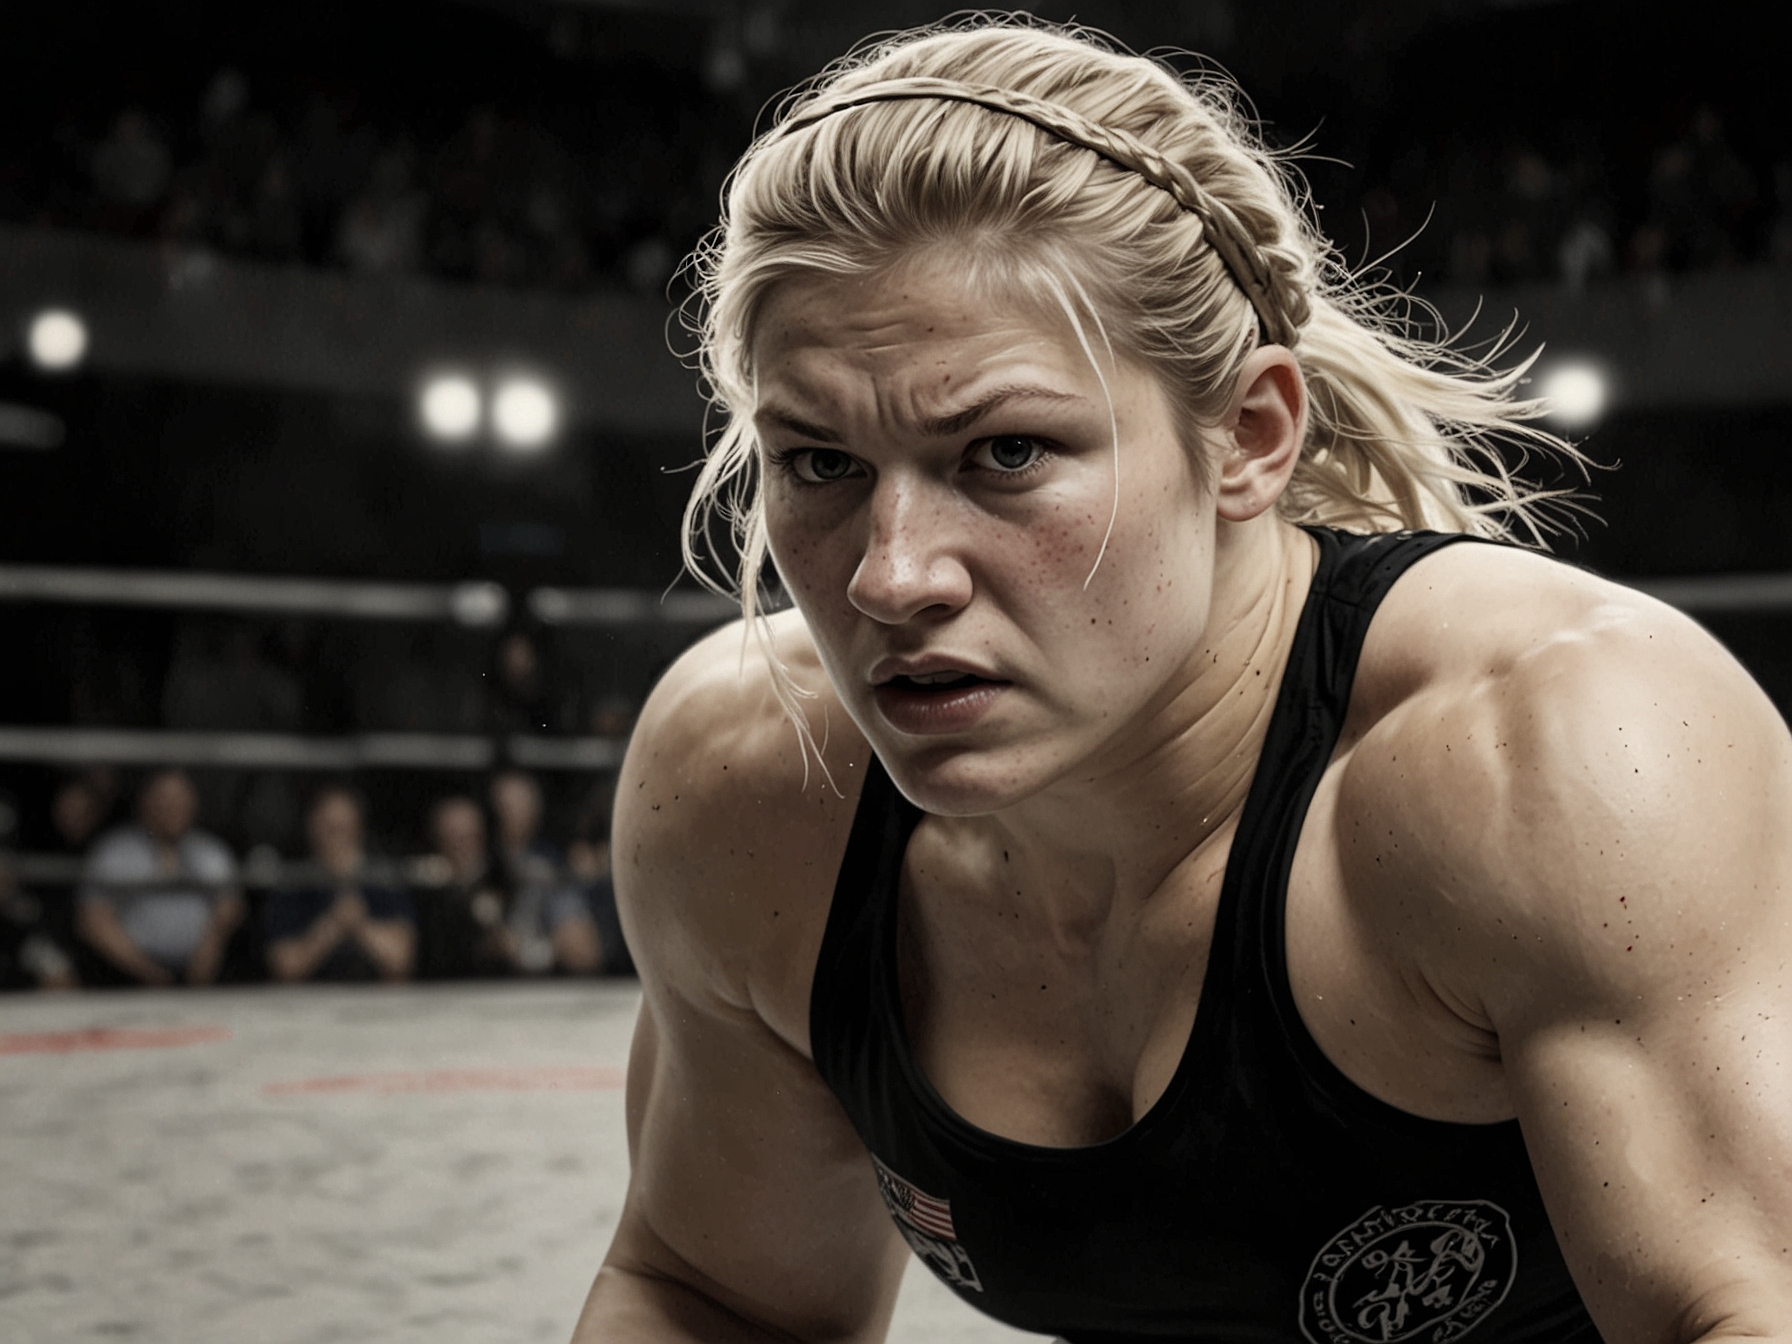 Kayla Harrison in action during an MMA fight, showcasing her grappling expertise and dominance in the ring as she aims for a championship title shot.